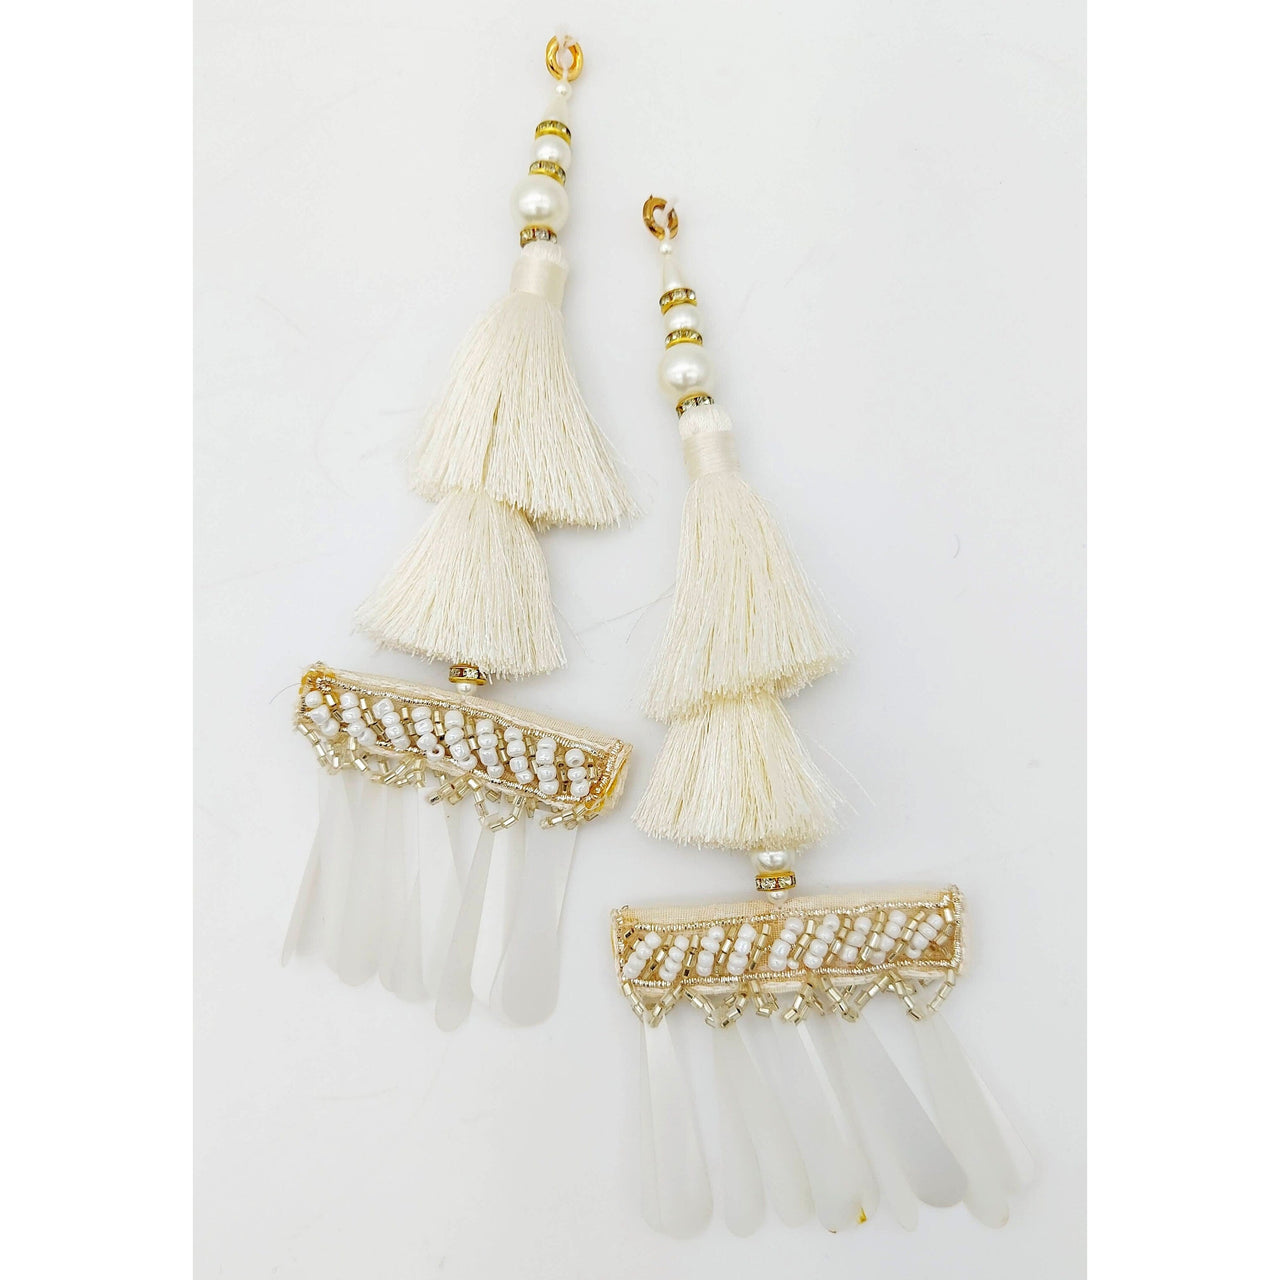 White Tassels With Long White Sequins And White and Gold Seed Pearl Beads, Beaded Thread Tassel Charms, 2 Pcs